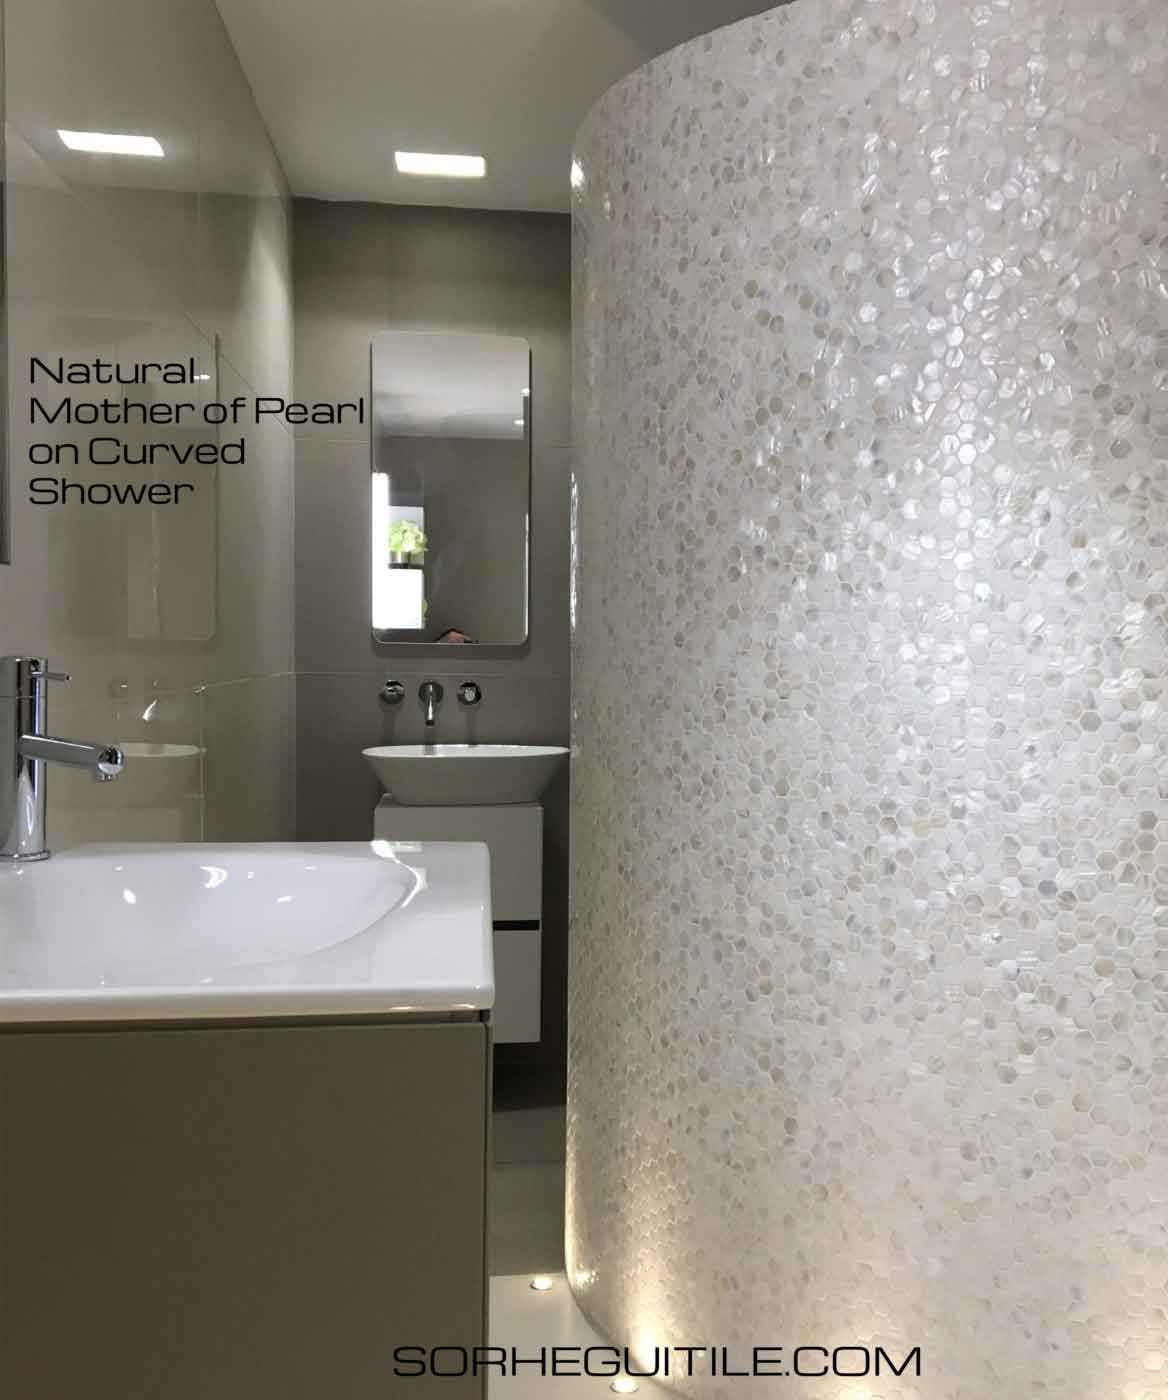 Bathroom with decorative, curbed wall of Siminetti Mother of Pearl Luxury Pearl Mosaic Tile from Ruben Sorhegui Tile Distributors Southwest Florida